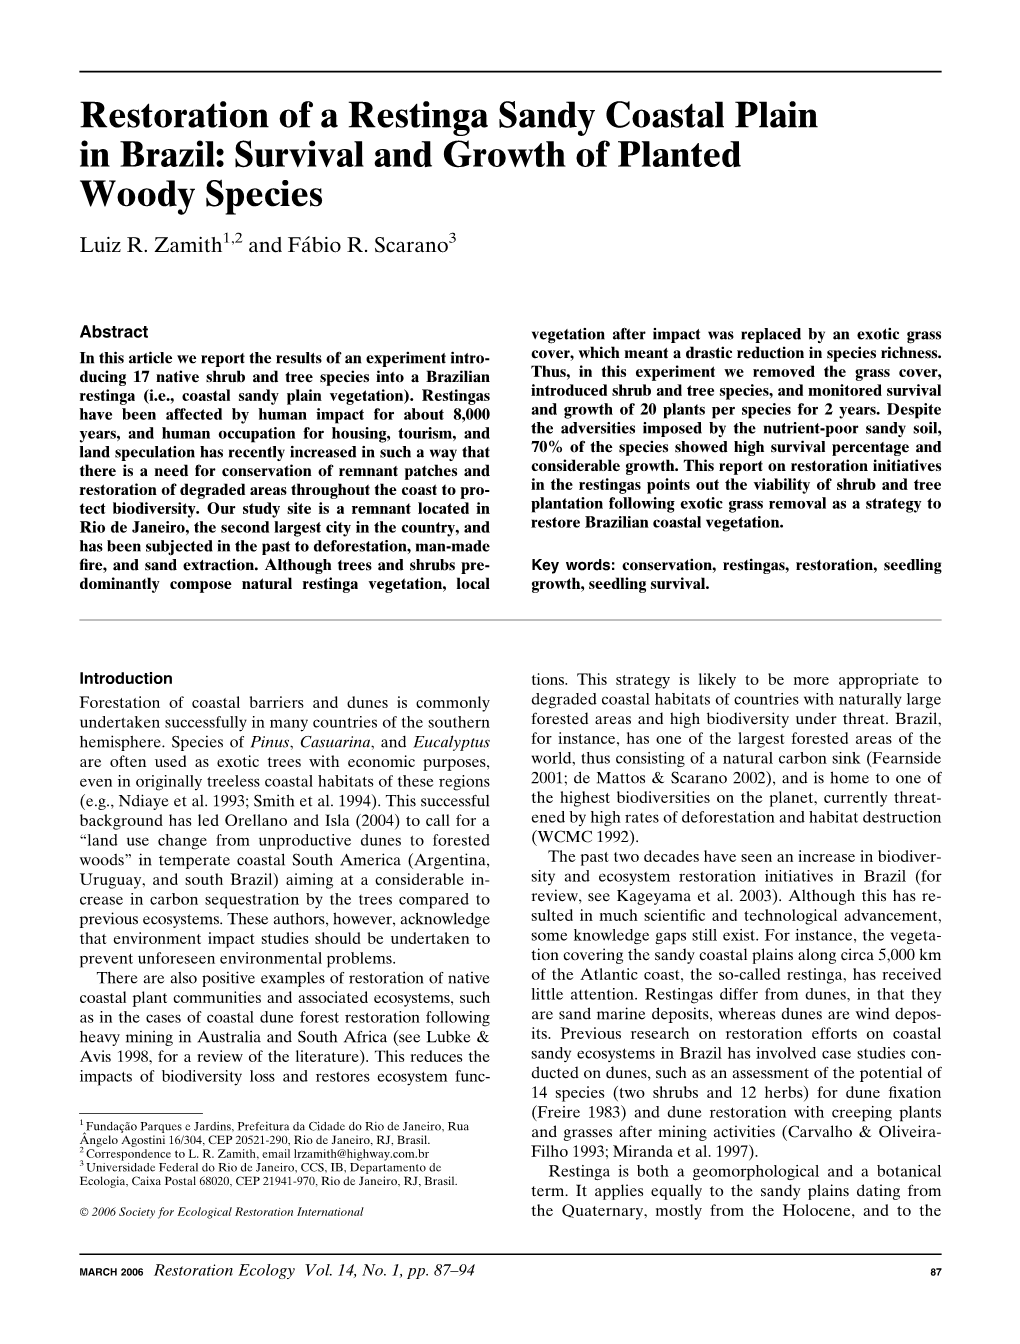 Restoration of a Restinga Sandy Coastal Plain in Brazil: Survival and Growth of Planted Woody Species Luiz R